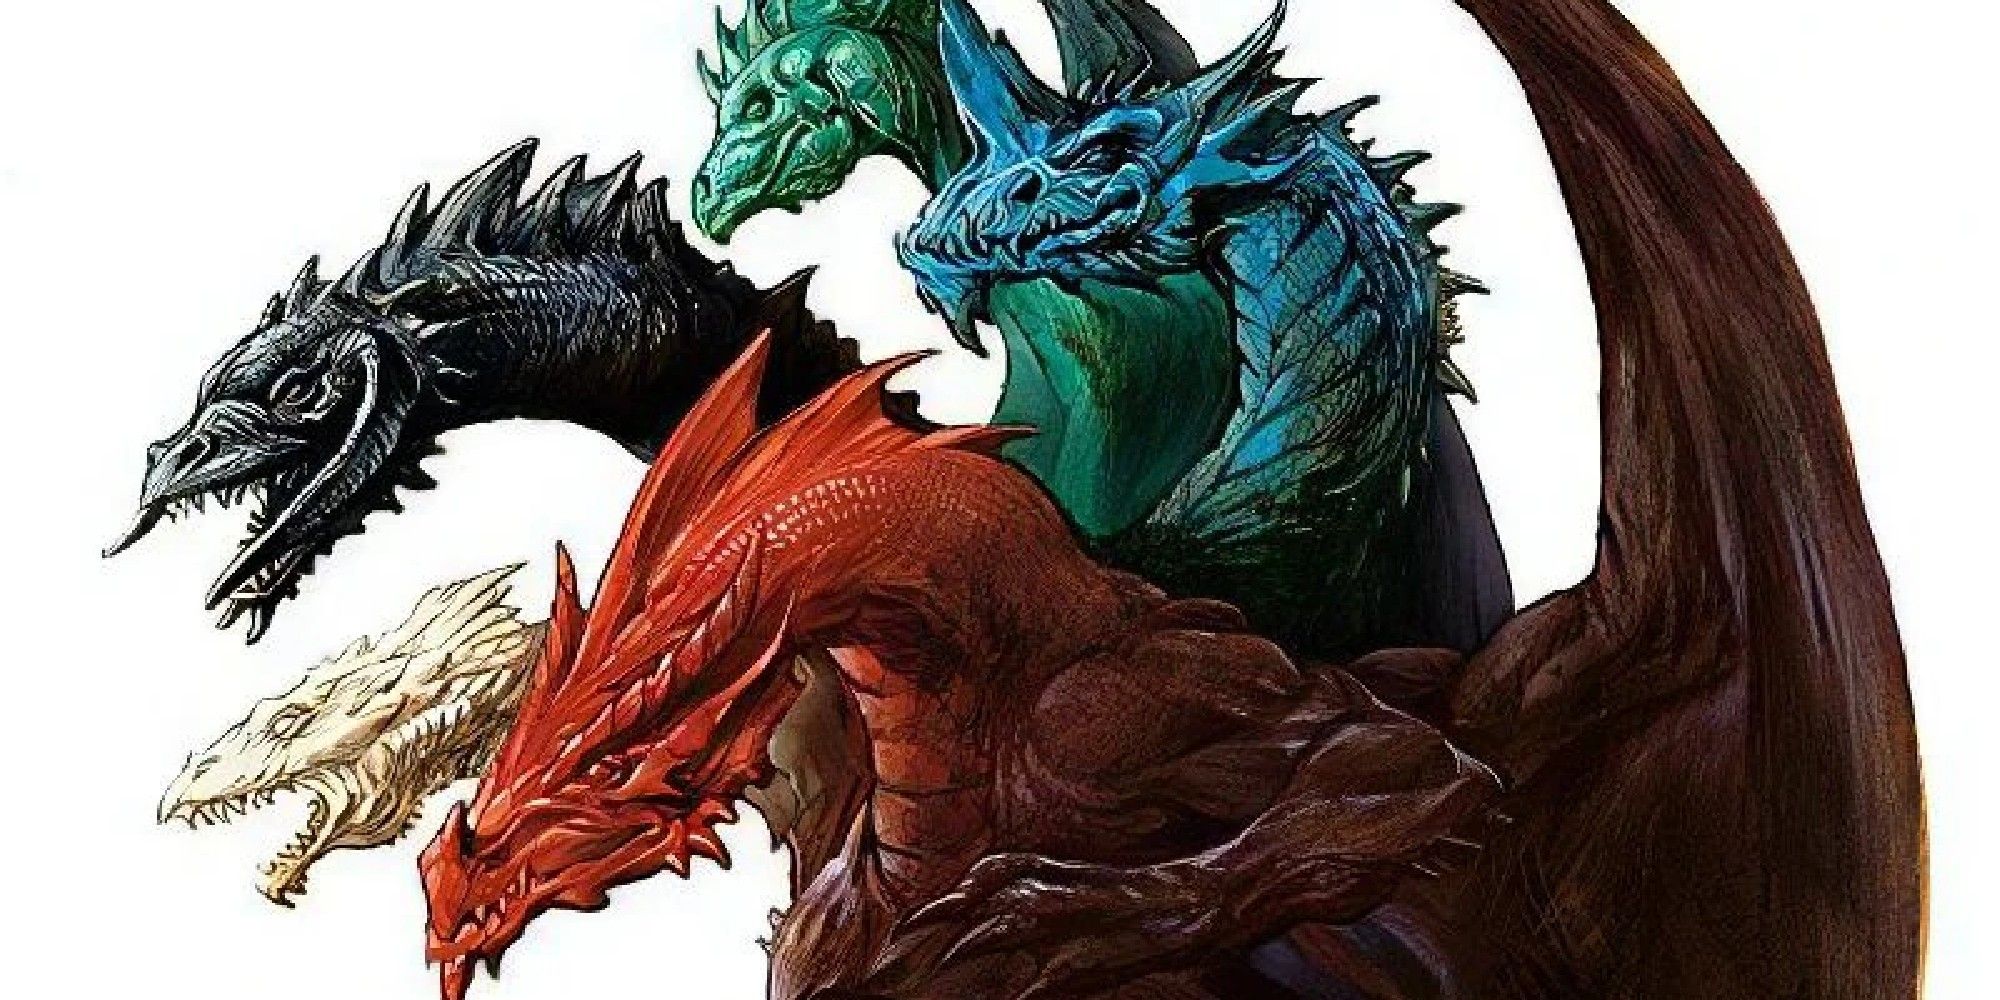 Dungeons & Dragons: The Five-Headed Menace